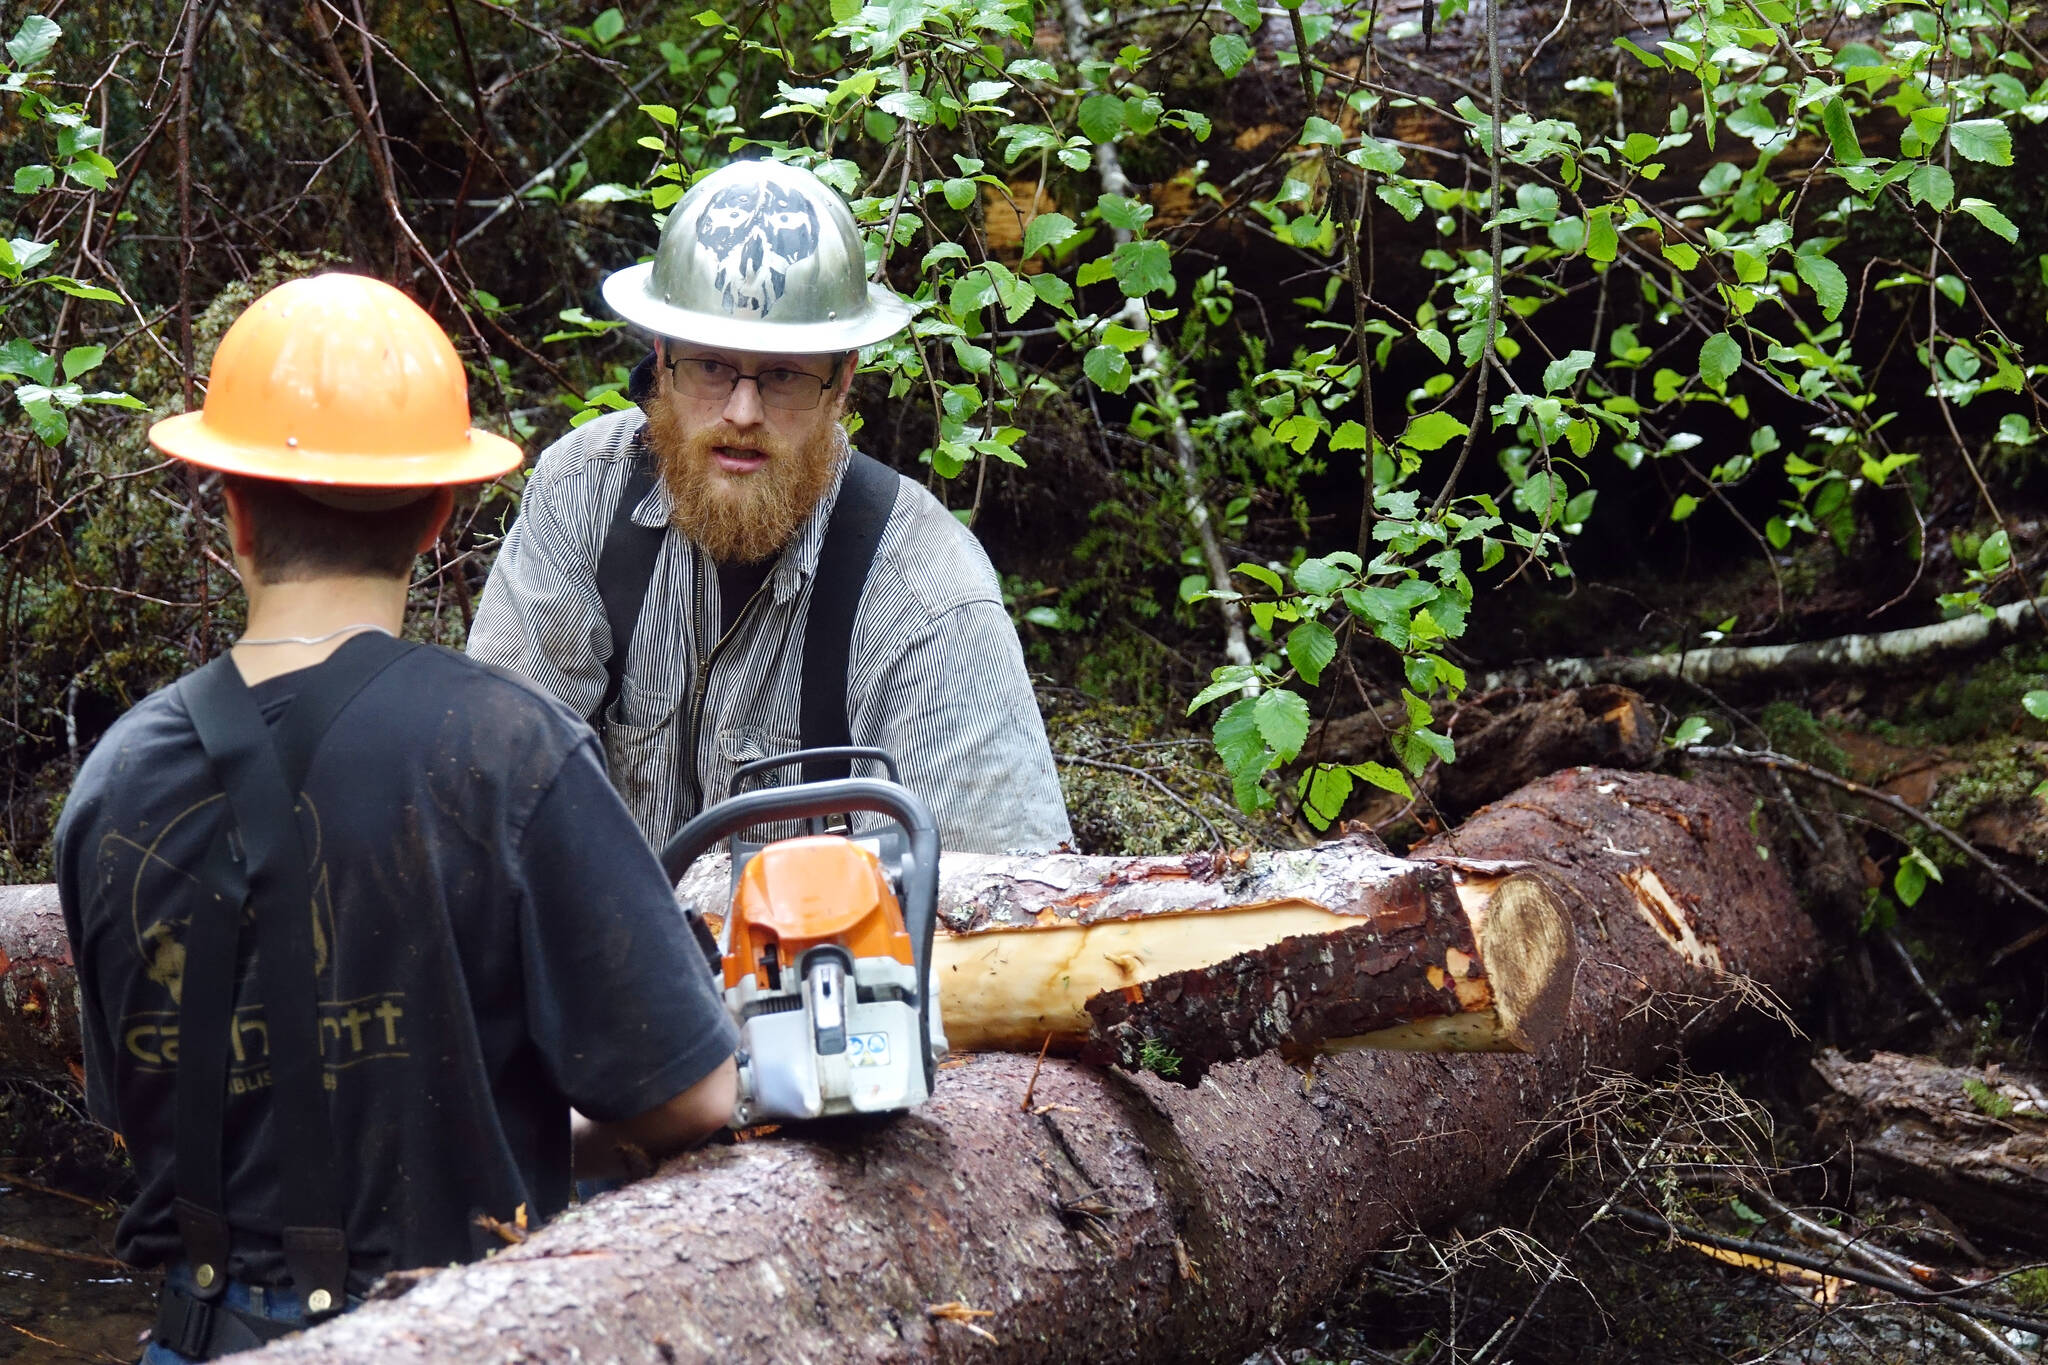 Cody Ellison and Quinn Aboudara of the Klawock Indigenous Stewards Forest Partnership consult on next steps for getting this particular log pictured into place. The Klawock partnership officially got off the ground in April with funding from the USDA’s sustainability strategy. (Courtesy Photos / Mary Catharine Martin)